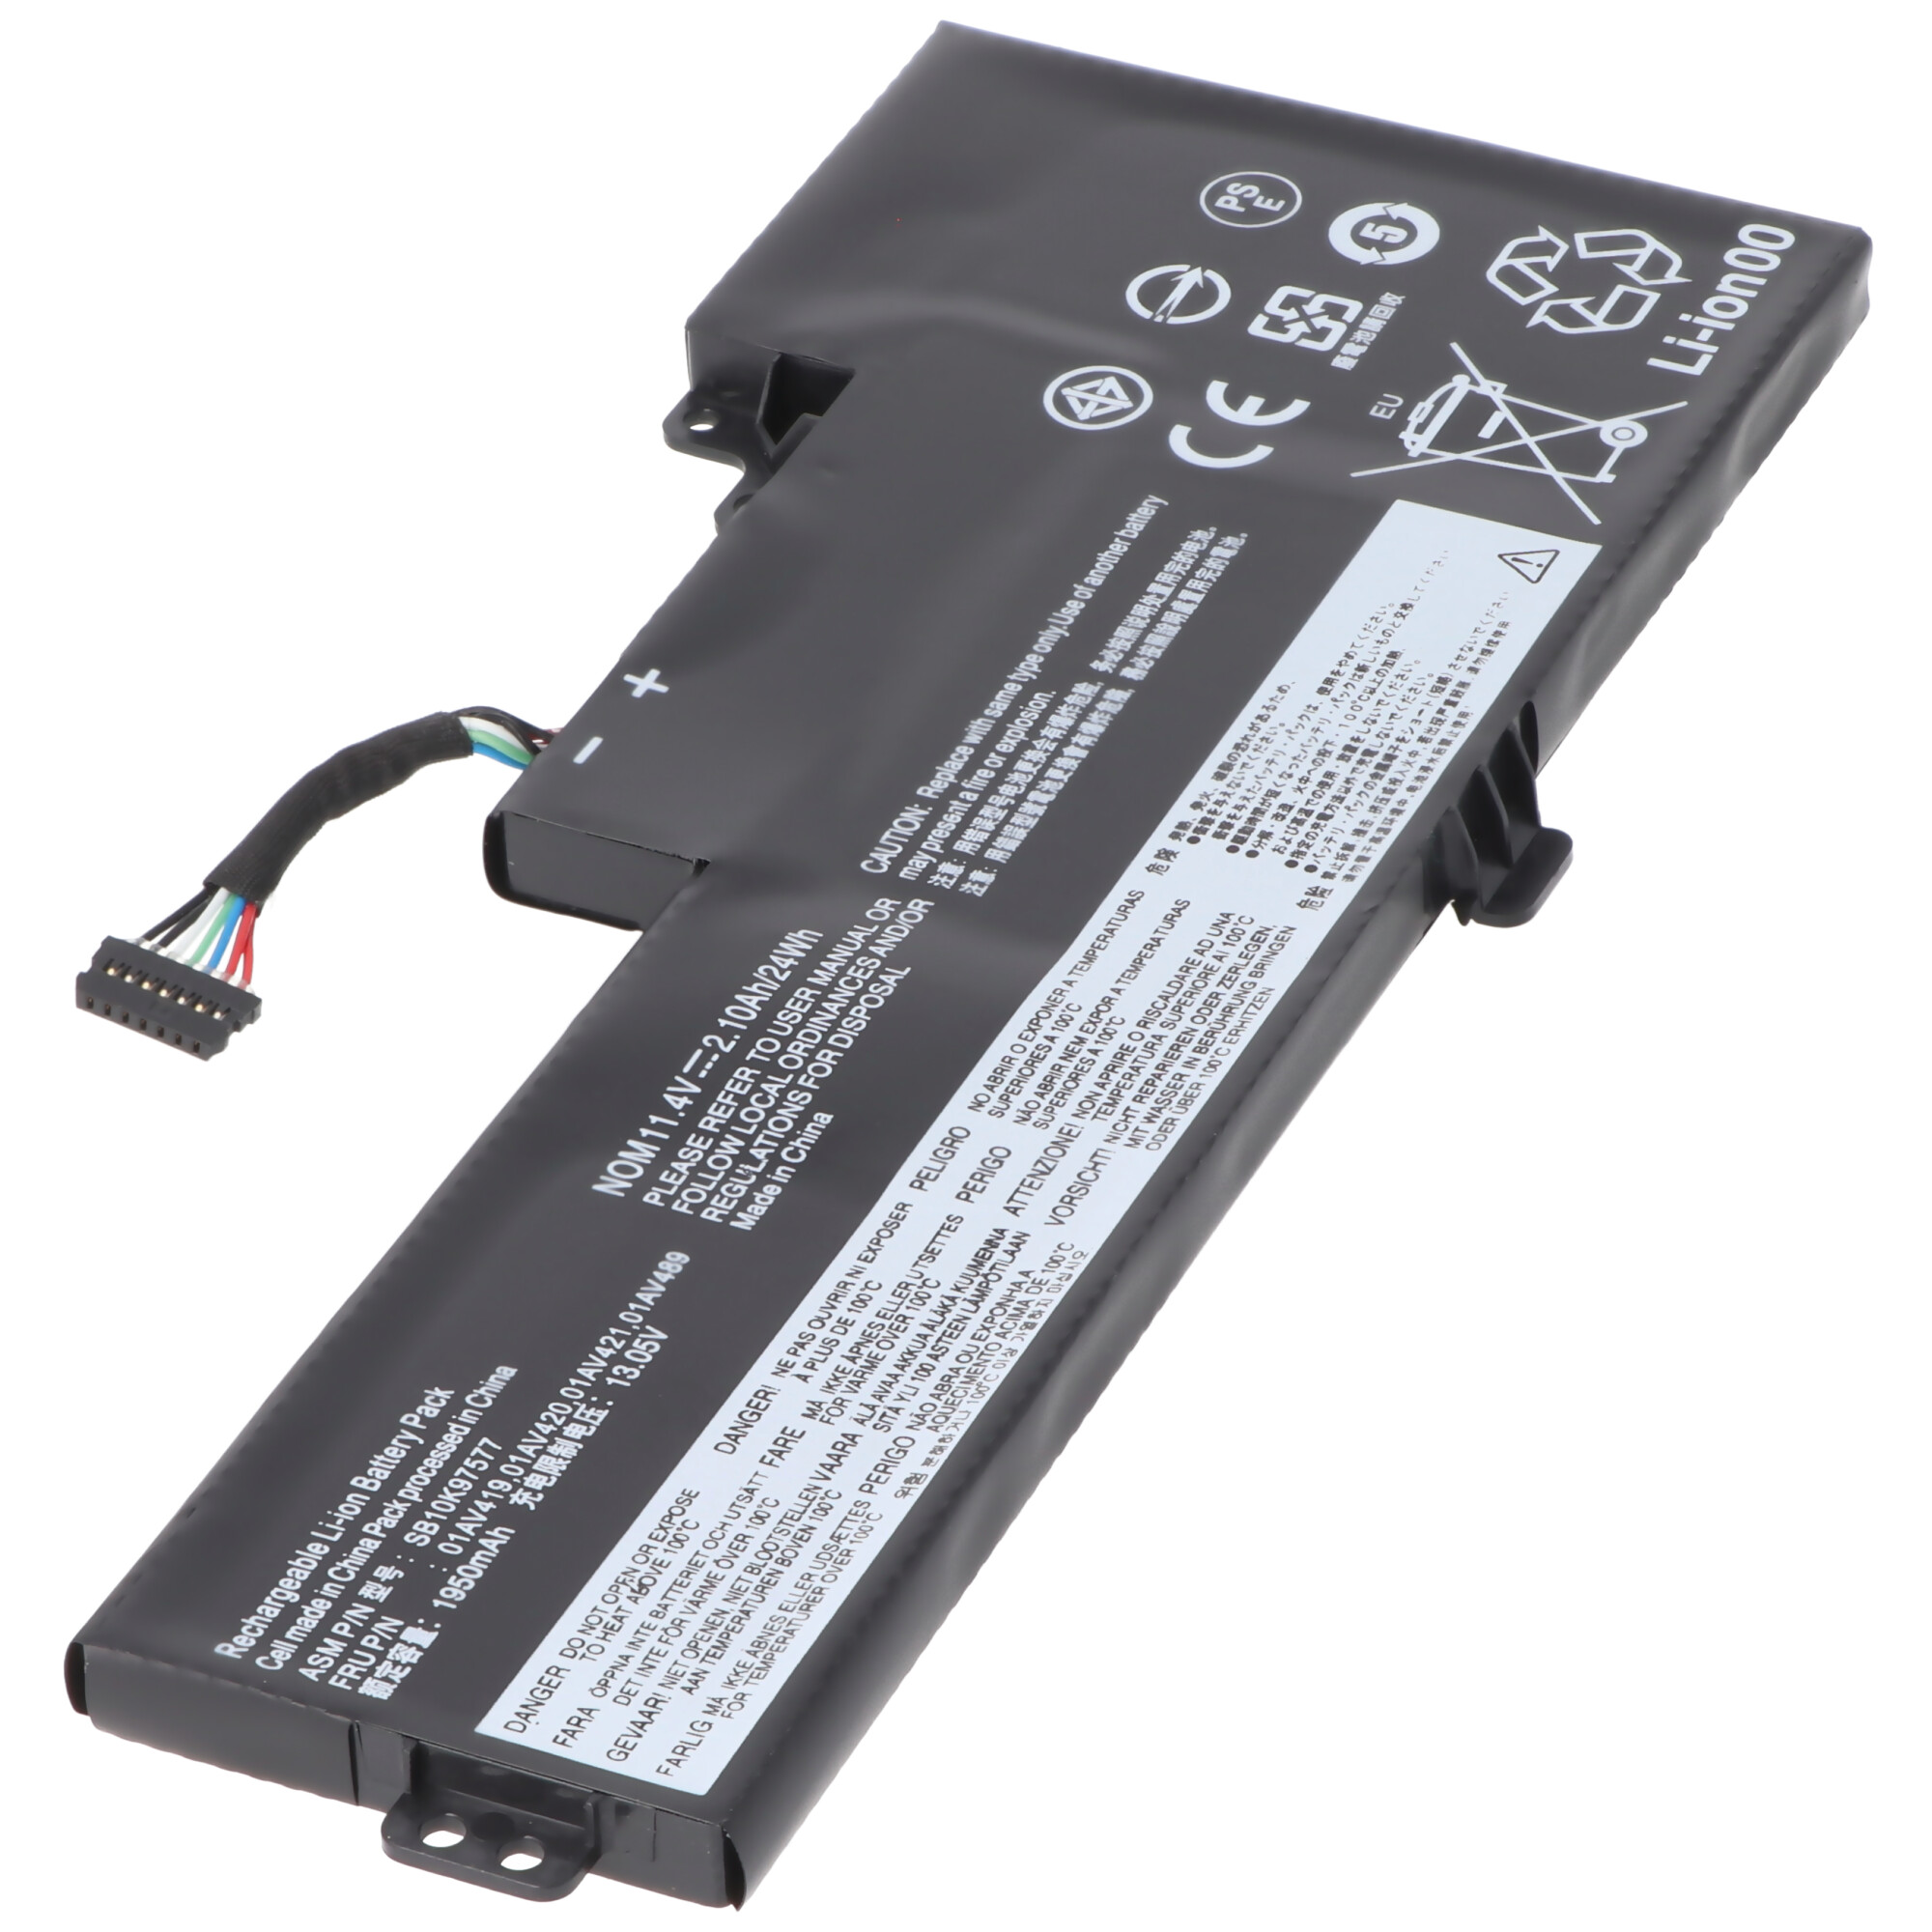 Akku passend für Lenovo ThinkPad T480, Li-Polymer, 11,4V, 2100mAh, 24Wh - internal - Please check in advance which battery is needed, because there is also an external battery!